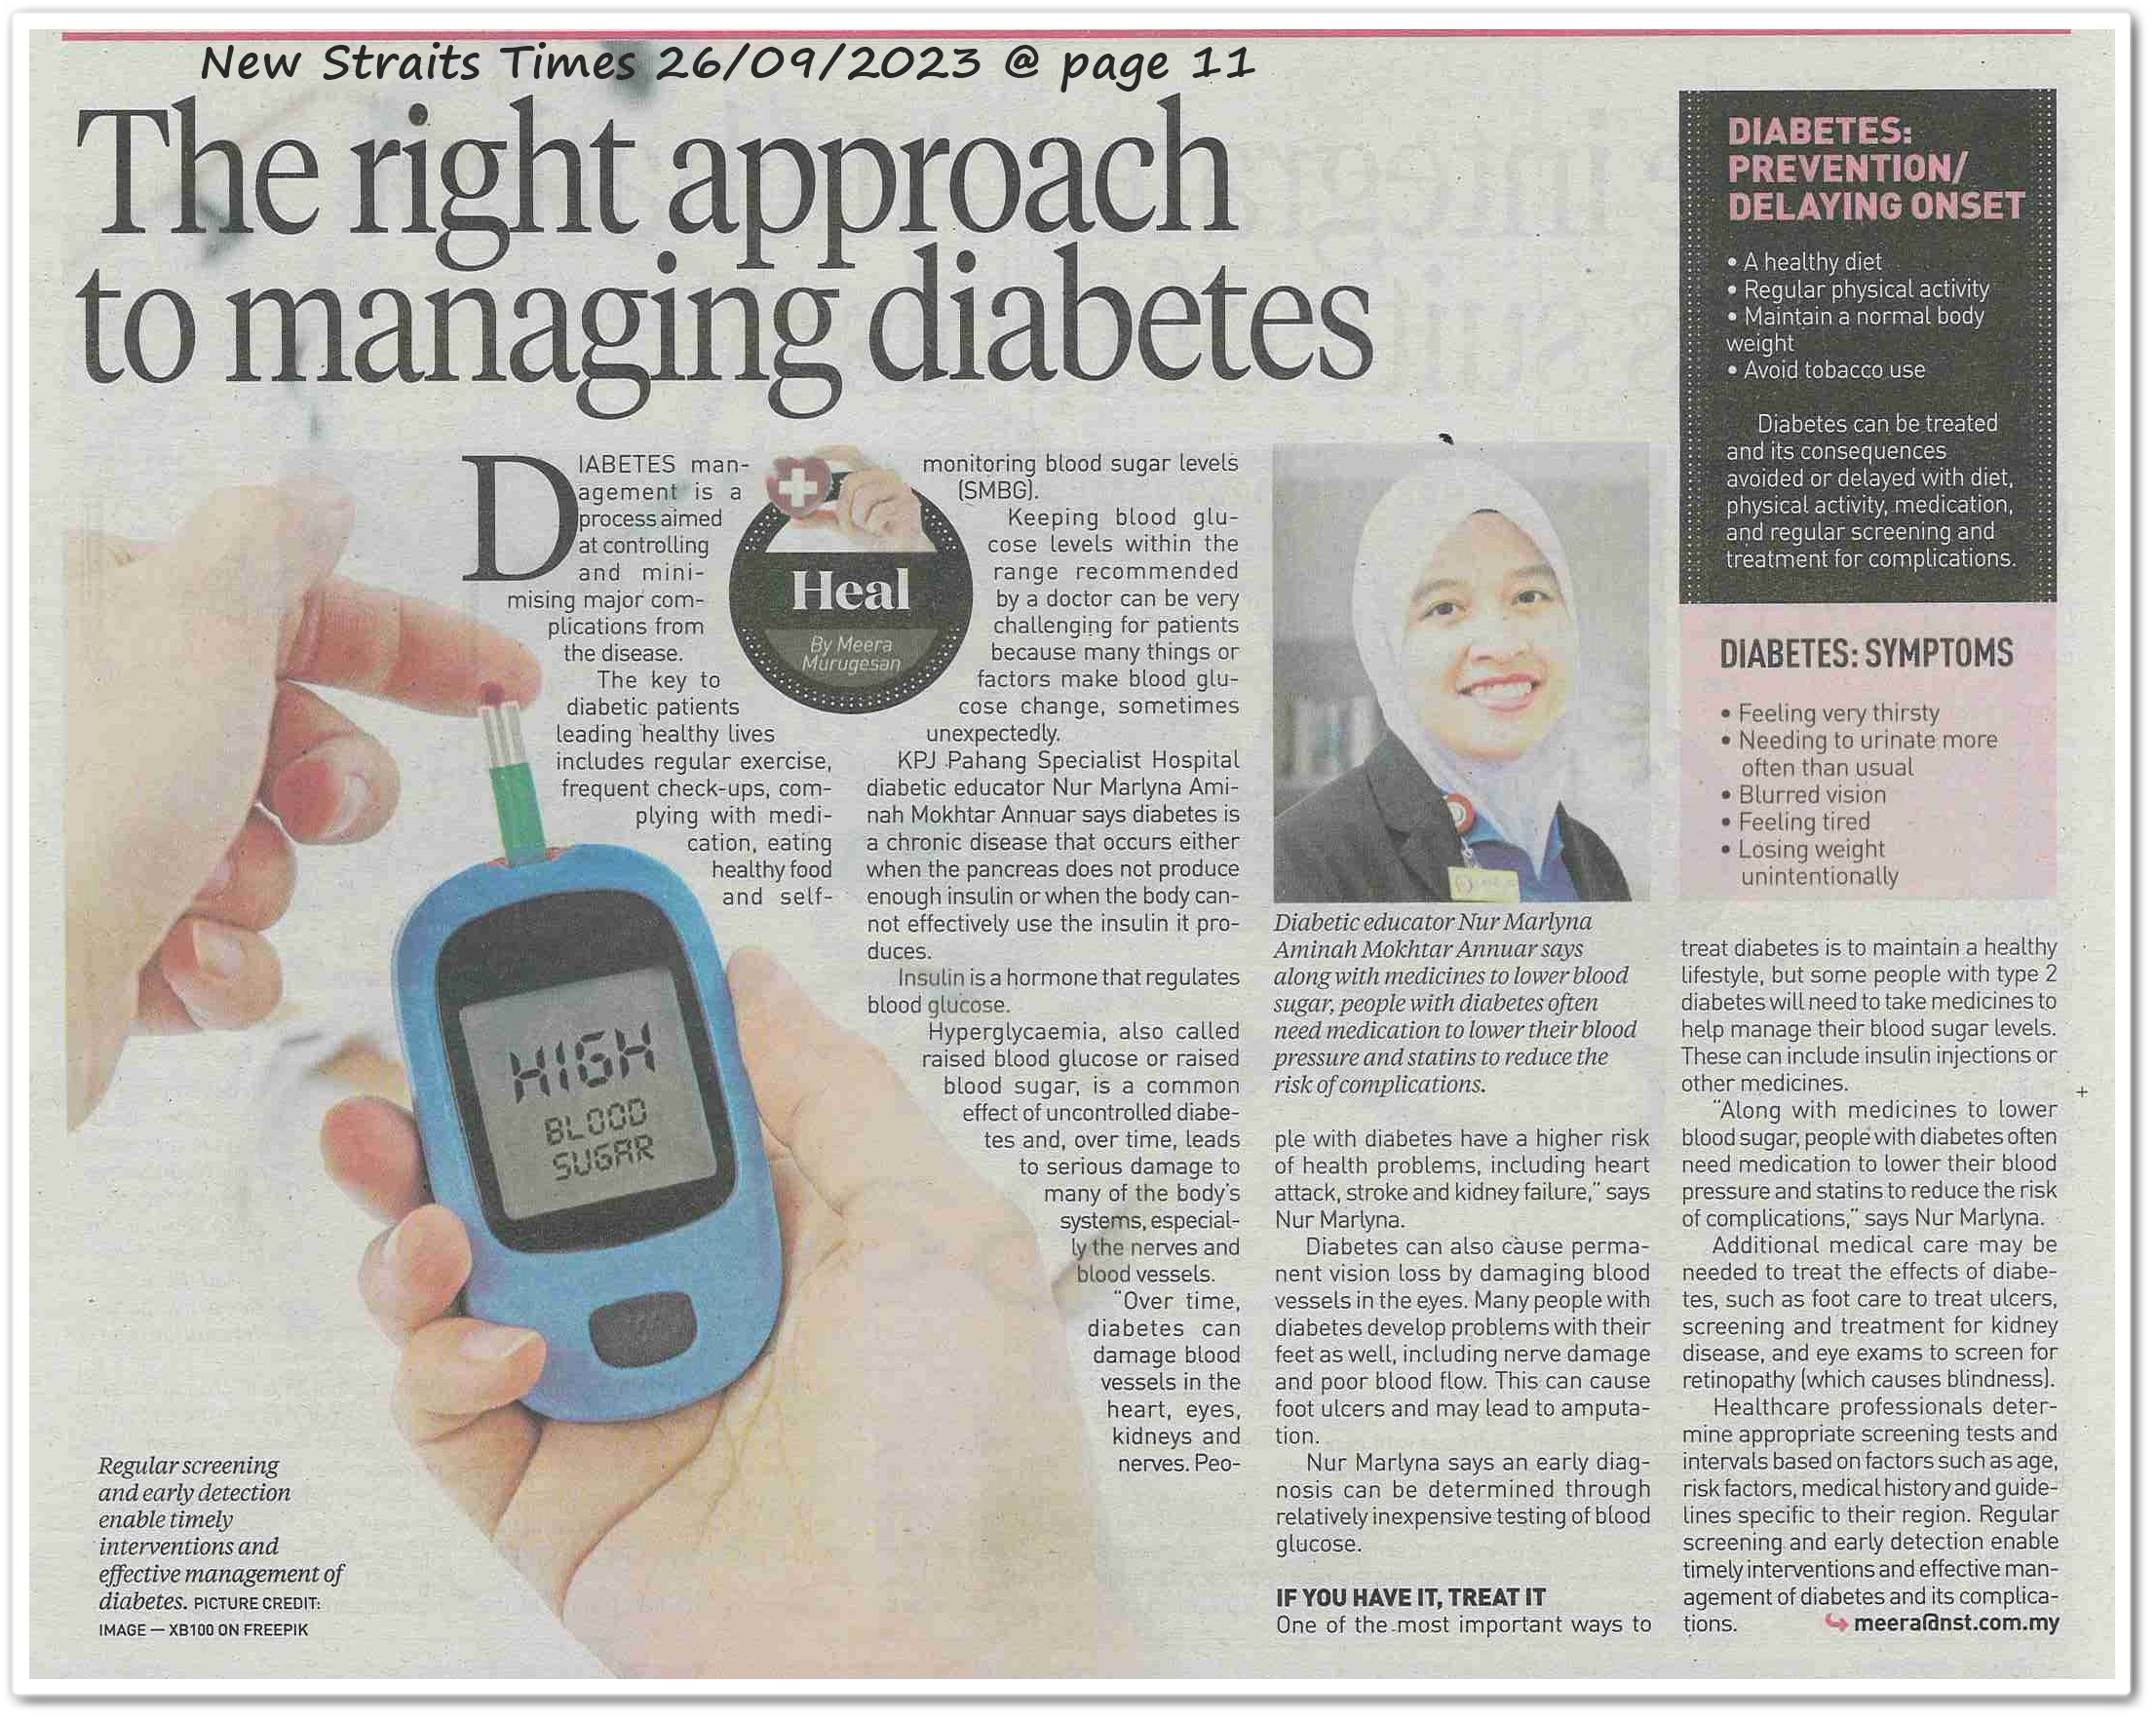 The right approach to managing diabetes